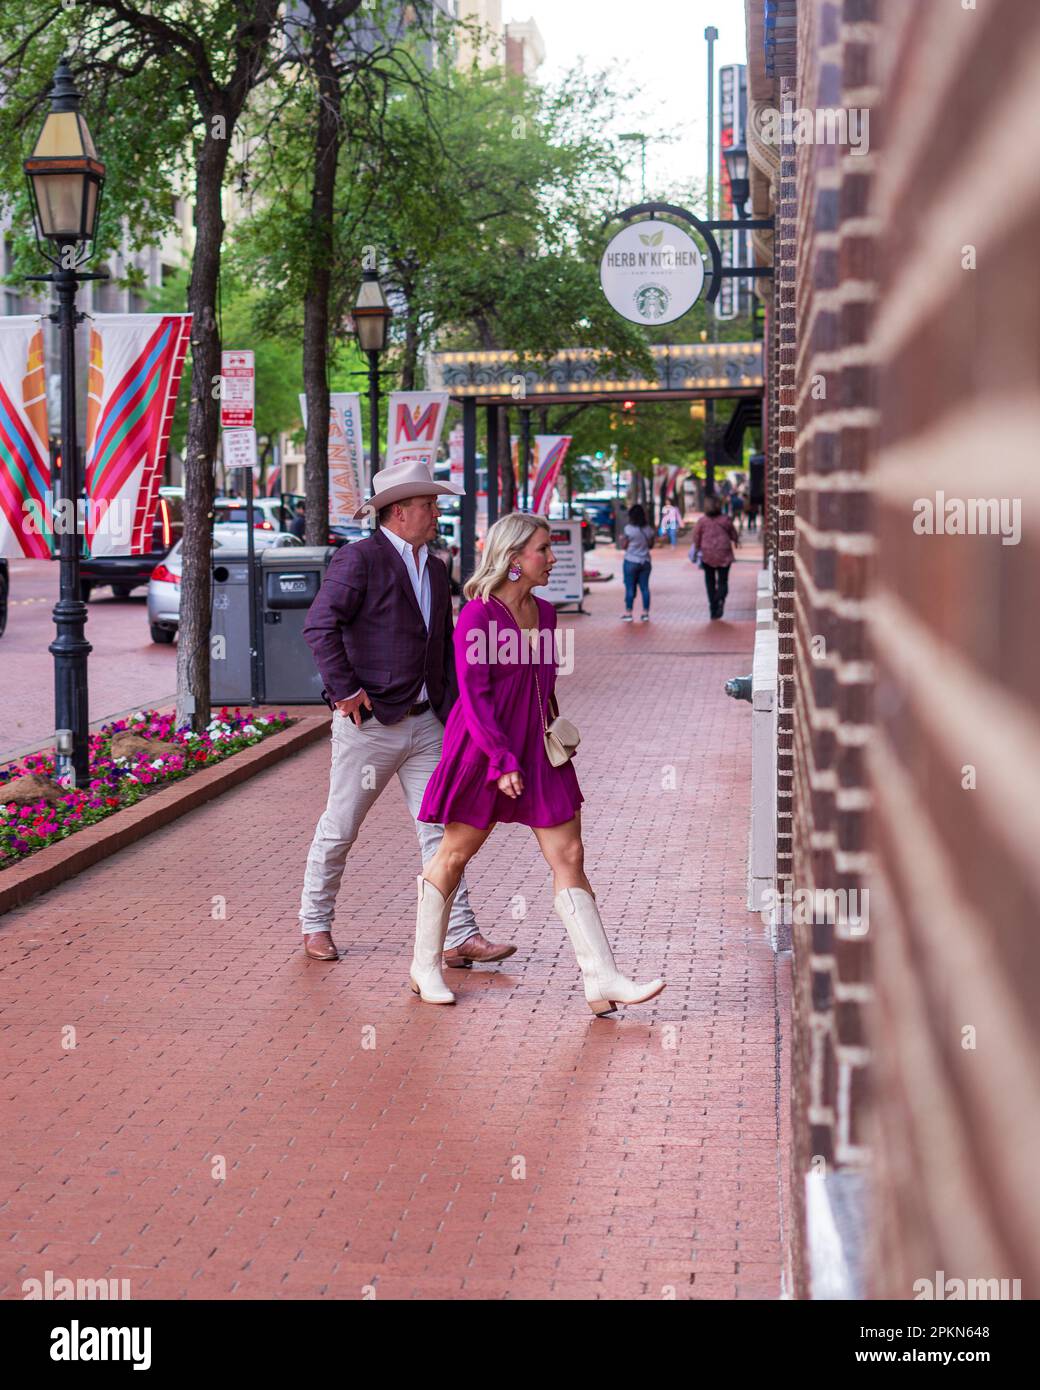 This local couple is dressed in typical Fort Worth style, wearing white hats and boots with purple clothing as a nod to the city's Western heritage. T Stock Photo